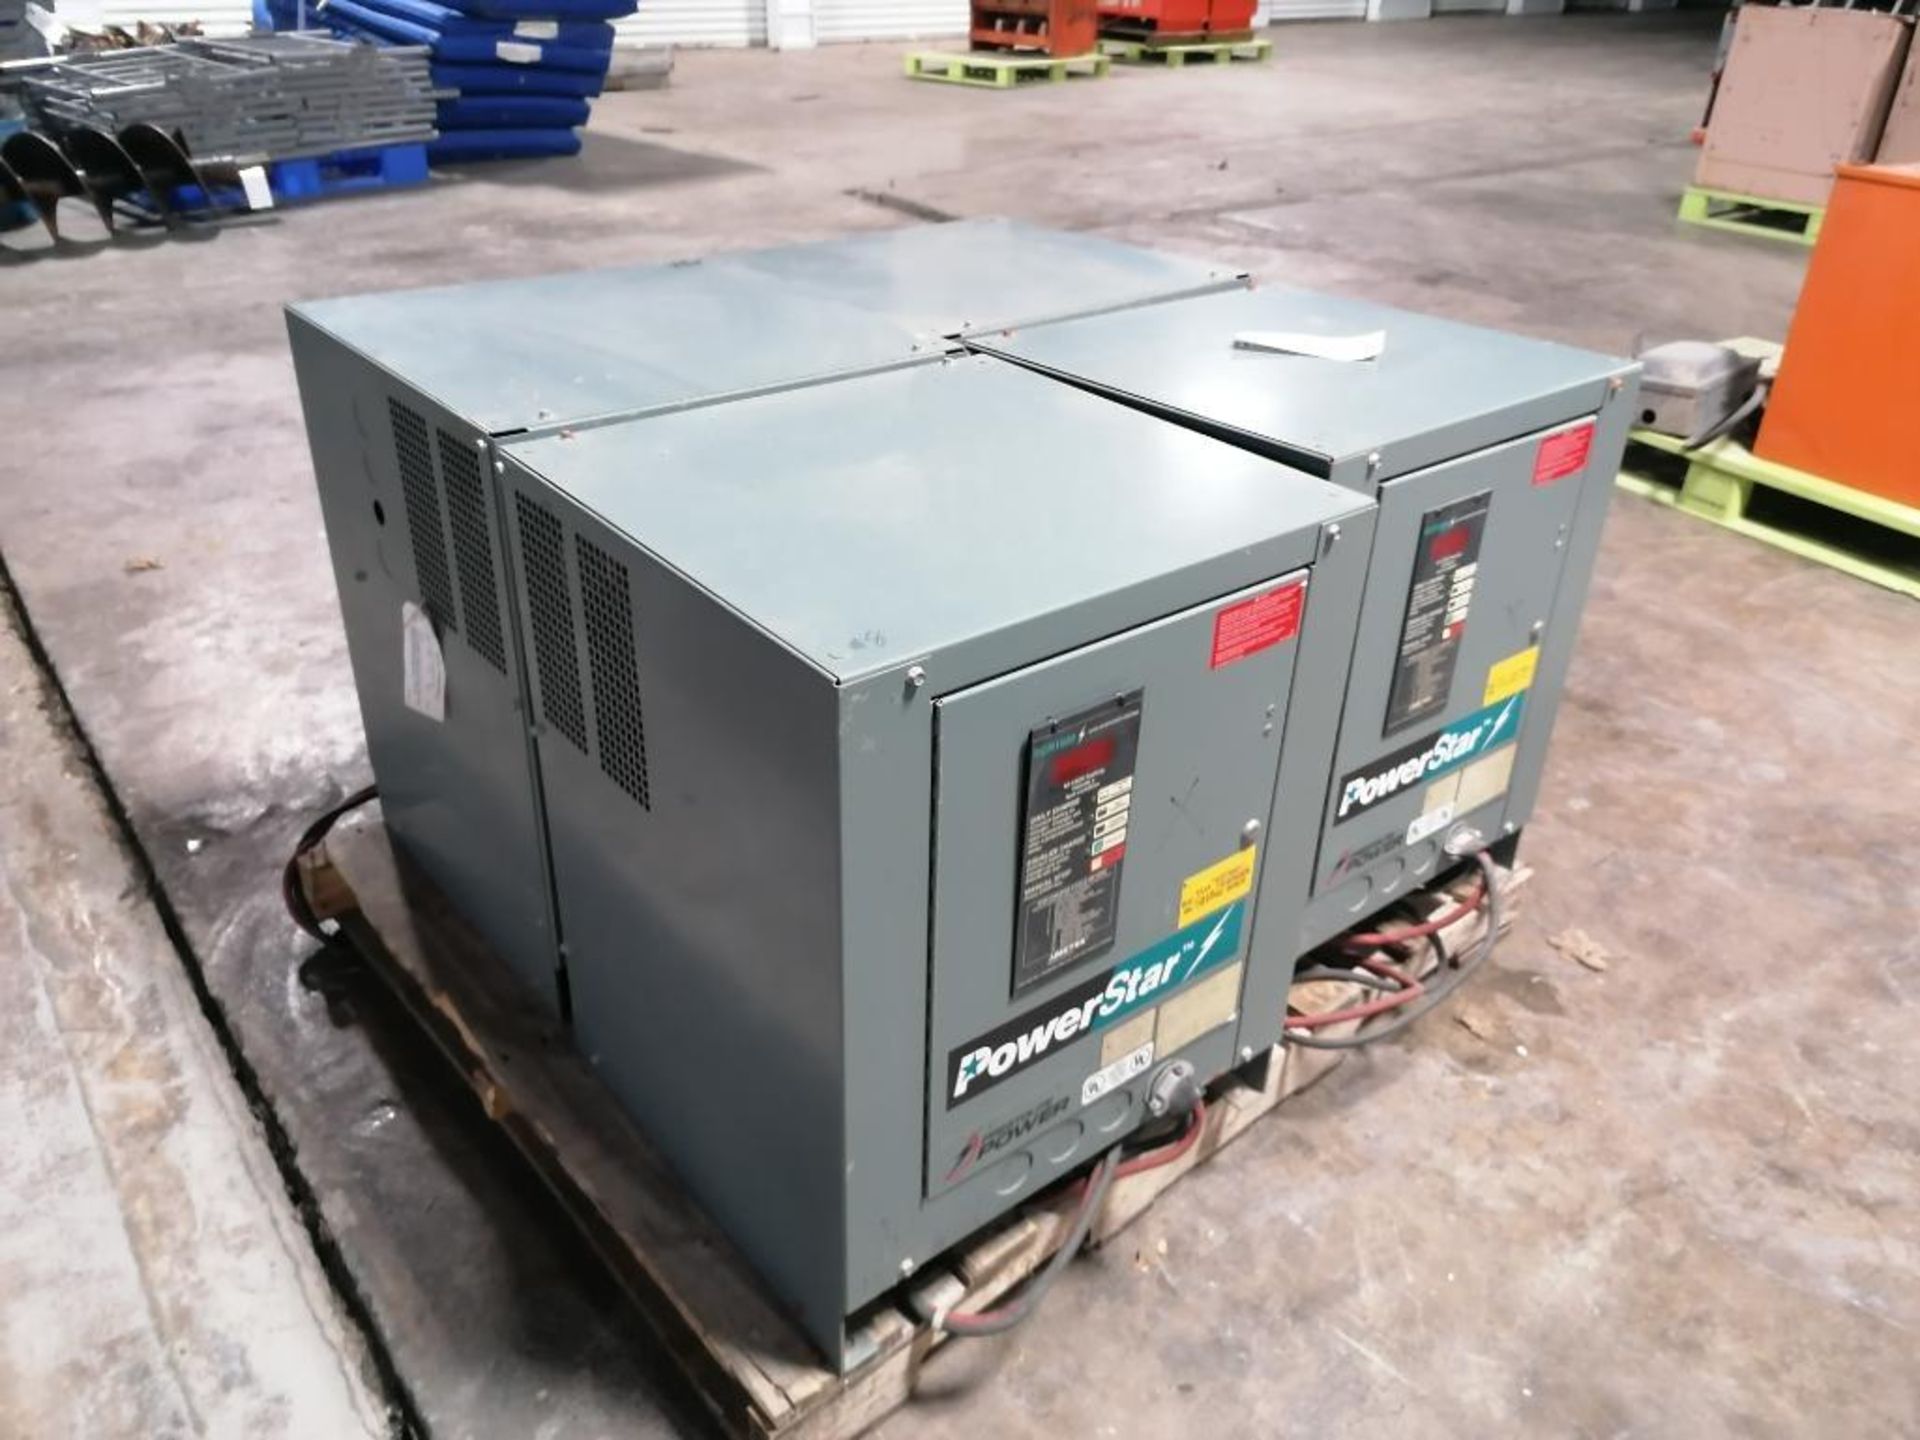 (4) PowerStar SCR1000 Industrial Forklift Battery Charger, Model 98Y3-12, Serial #404CS21472, Serial - Image 2 of 19